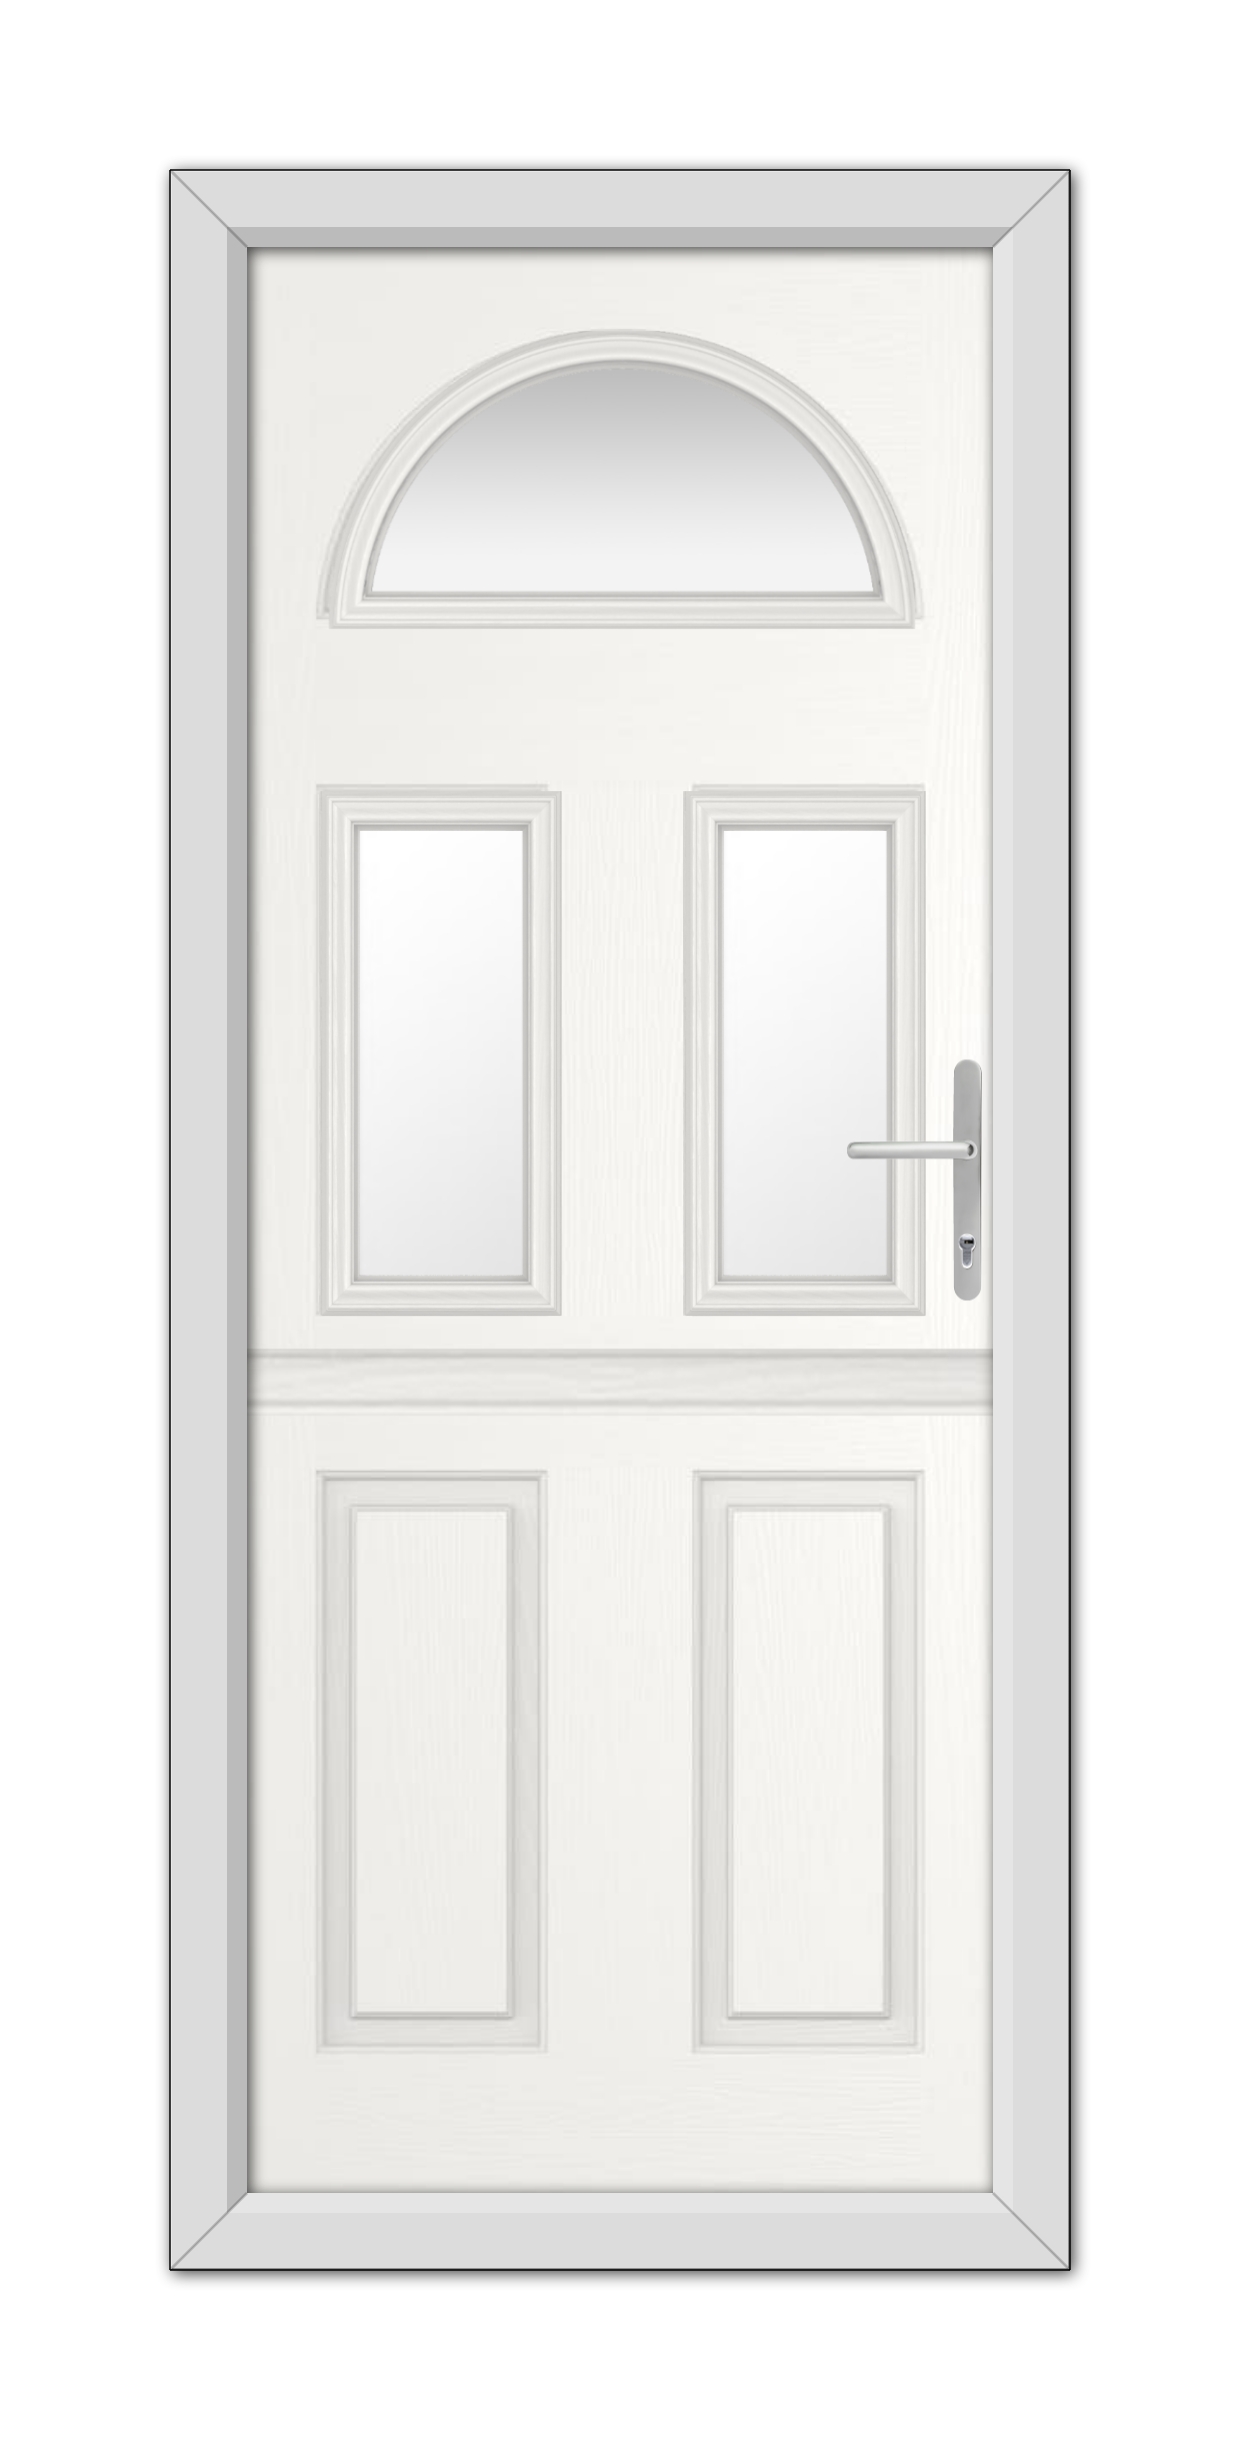 White Winslow 3 Stable Composite Door 48mm Timber Core with an arched window at the top and a metallic handle, set in a simple frame.